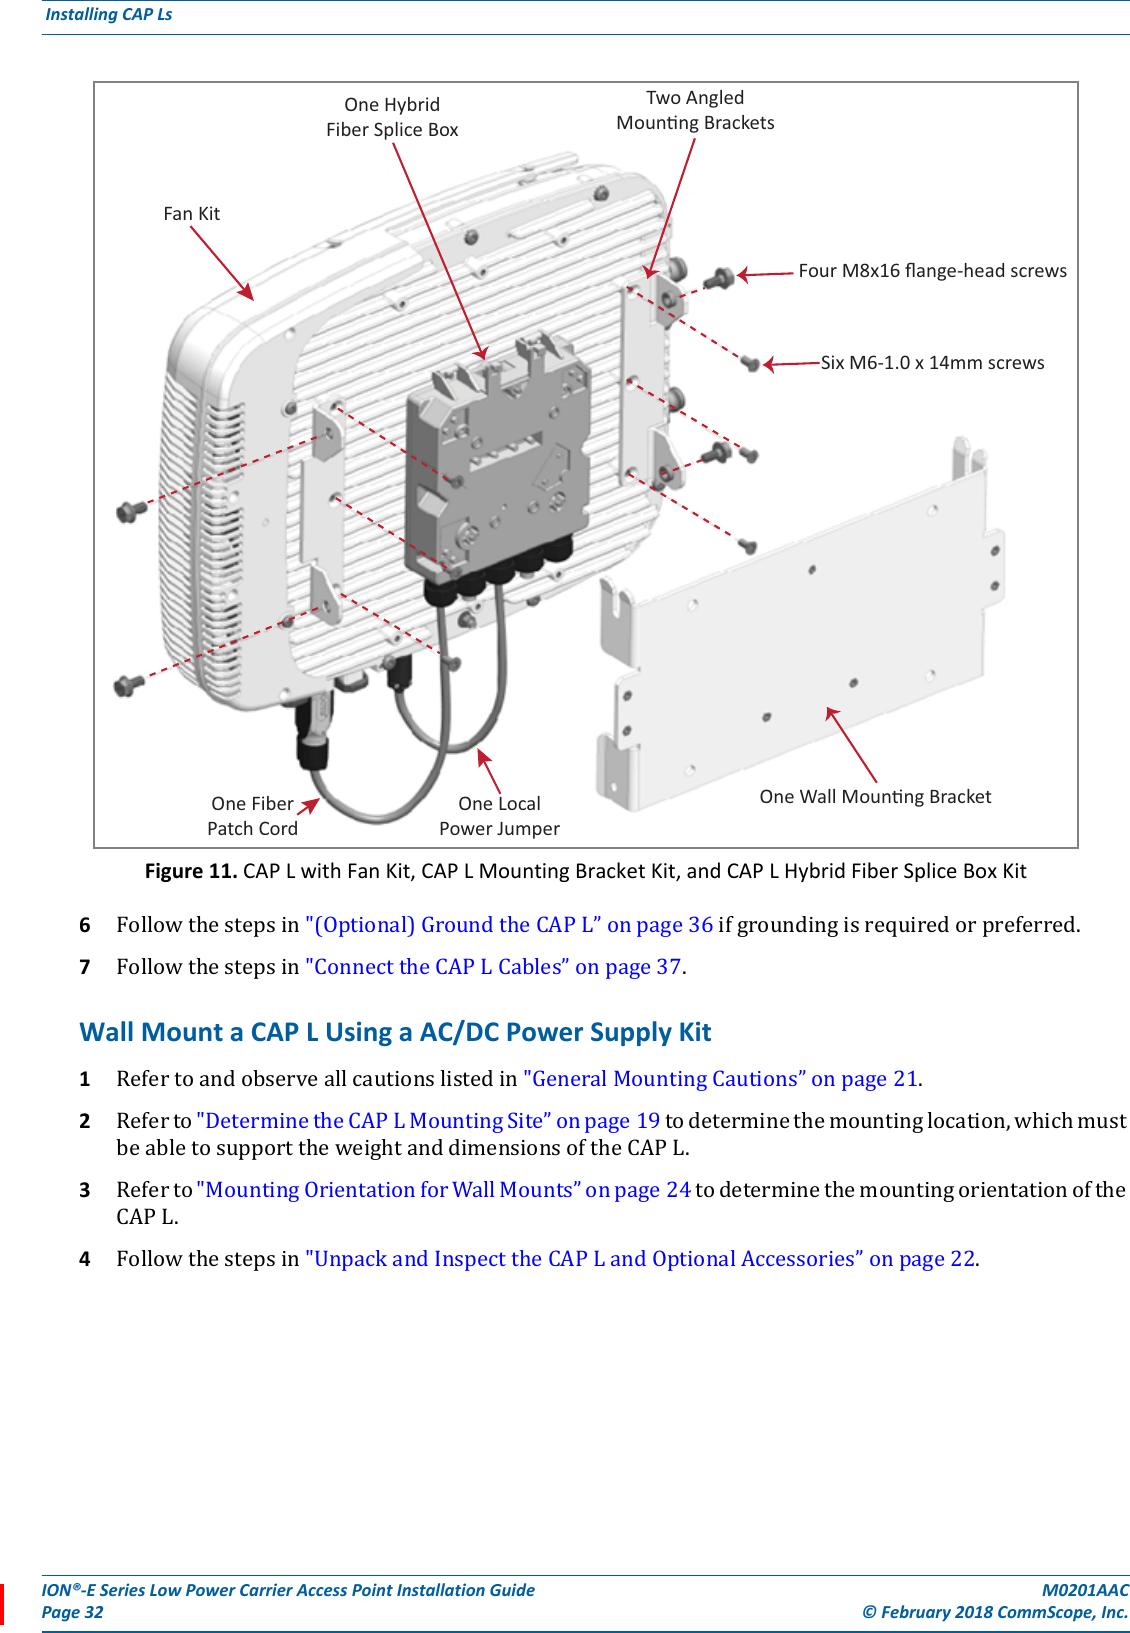 ION®-E Series Low Power Carrier Access Point Installation Guide M0201AACPage 32 © February 2018 CommScope, Inc. Installing CAP Ls  Figure 11. CAP L with Fan Kit, CAP L Mounting Bracket Kit, and CAP L Hybrid Fiber Splice Box Kit6Followthestepsin&quot;(Optional)GroundtheCAPL”onpage36ifgroundingisrequiredorpreferred.7Followthestepsin&quot;ConnecttheCAPLCables”onpage37.Wall Mount a CAP L Using a AC/DC Power Supply Kit 1Refertoandobserveallcautionslistedin&quot;GeneralMountingCautions”onpage21.2Referto&quot;DeterminetheCAPLMountingSite”onpage19todeterminethemountinglocation,whichmustbeabletosupporttheweightanddimensionsoftheCAPL.3Referto&quot;MountingOrientationforWallMounts”onpage24todeterminethemountingorientationoftheCAPL.4Followthestepsin&quot;UnpackandInspecttheCAPLandOptionalAccessories”onpage22.Two AngledMounng BracketsFour M8x16 ﬂange-head screwsSix M6-1.0 x 14mm screwsOne HybridFiber Splice BoxOne Wall Mounng BracketFan KitOne LocalPower JumperOne FiberPatch Cord